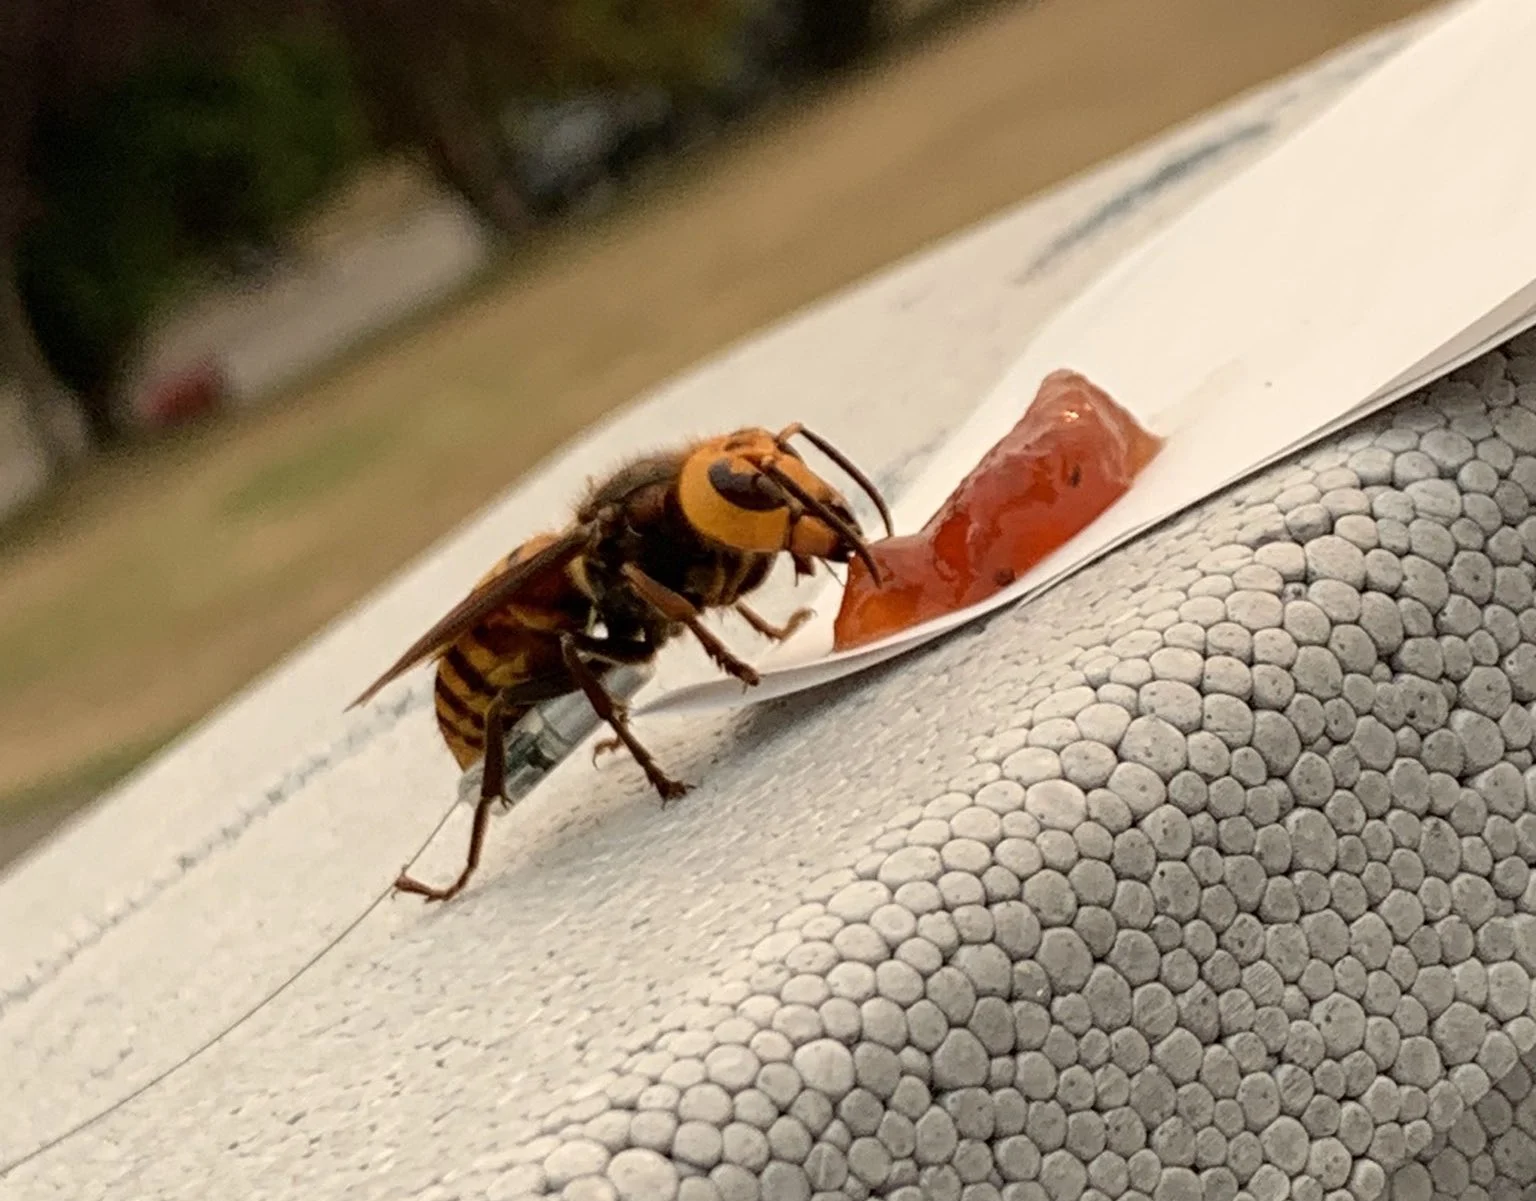 First live "murder hornet" of 2021 has been spotted near Canadian border